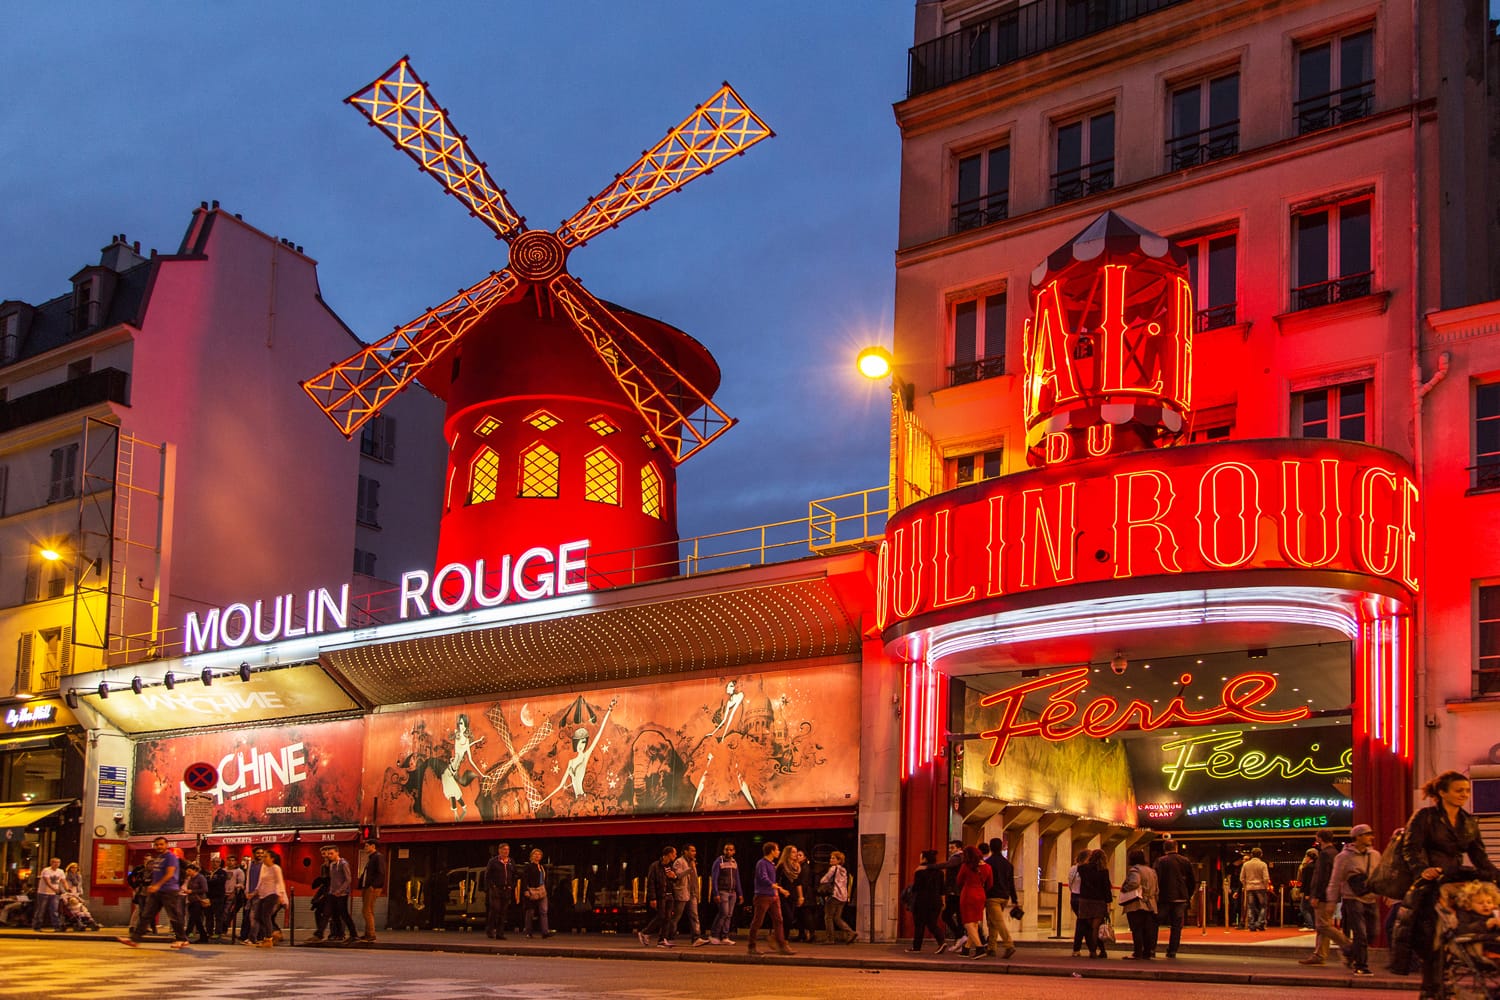 Moulin Rouge in Paris at night